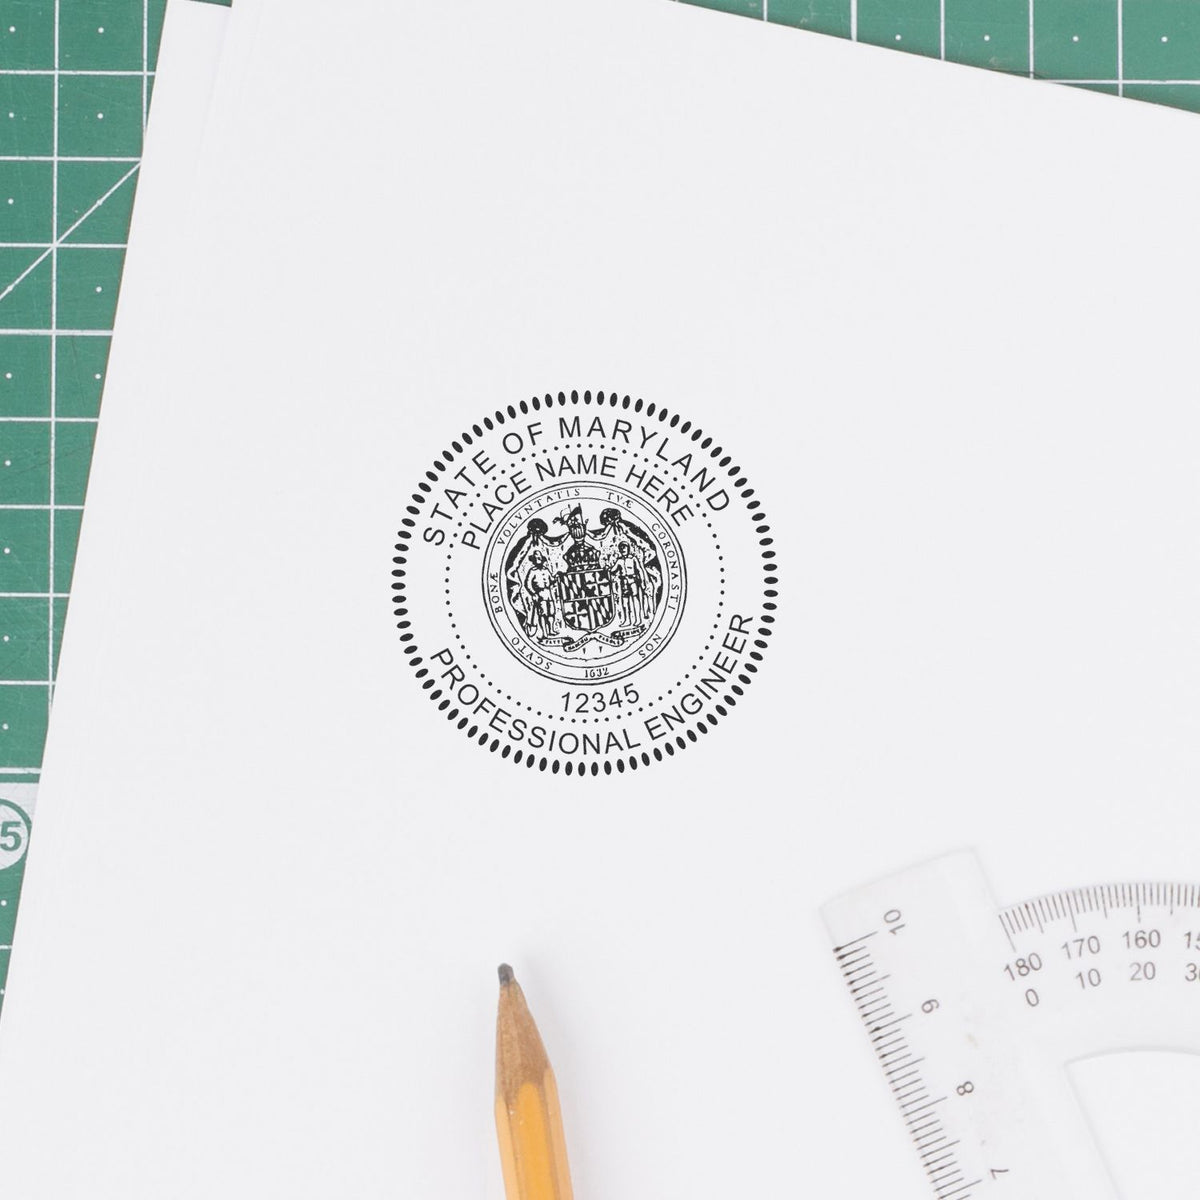 The Maryland Professional Engineer Seal Stamp stamp impression comes to life with a crisp, detailed photo on paper - showcasing true professional quality.